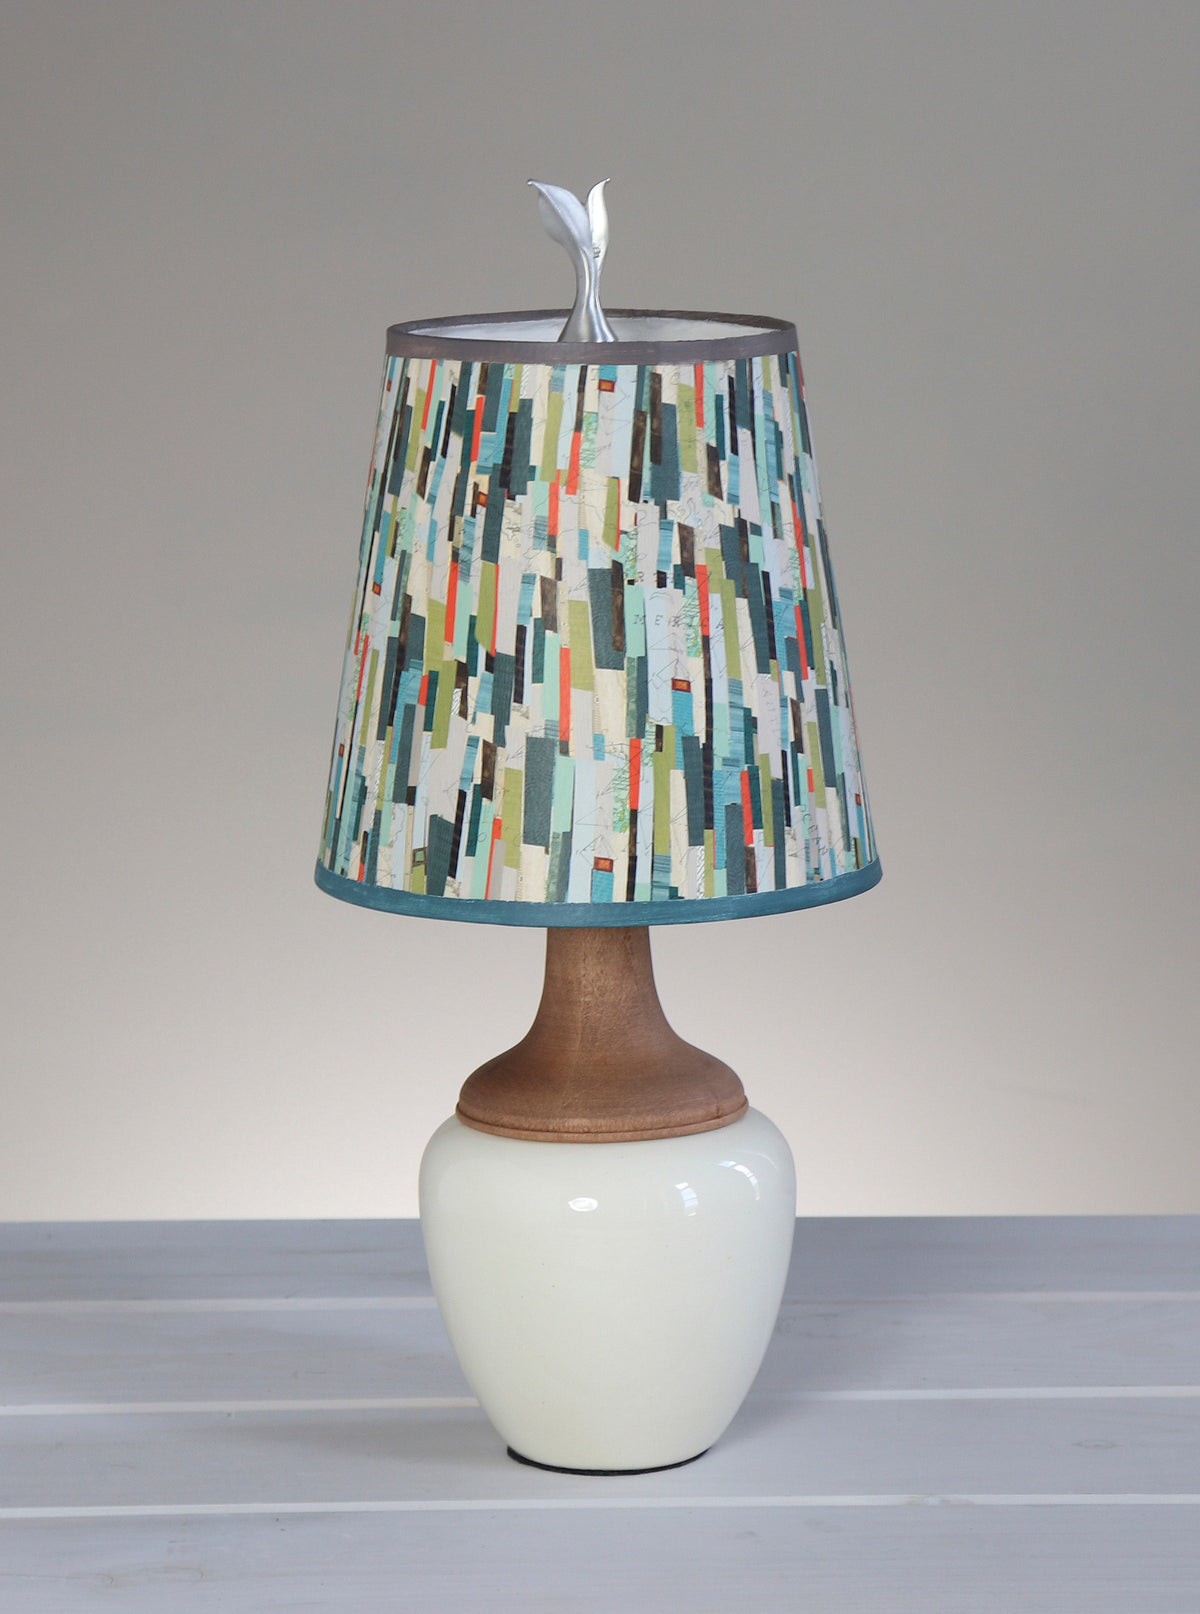 Ceramic and Maple Table Lamp with Small Drum Shade in Papers